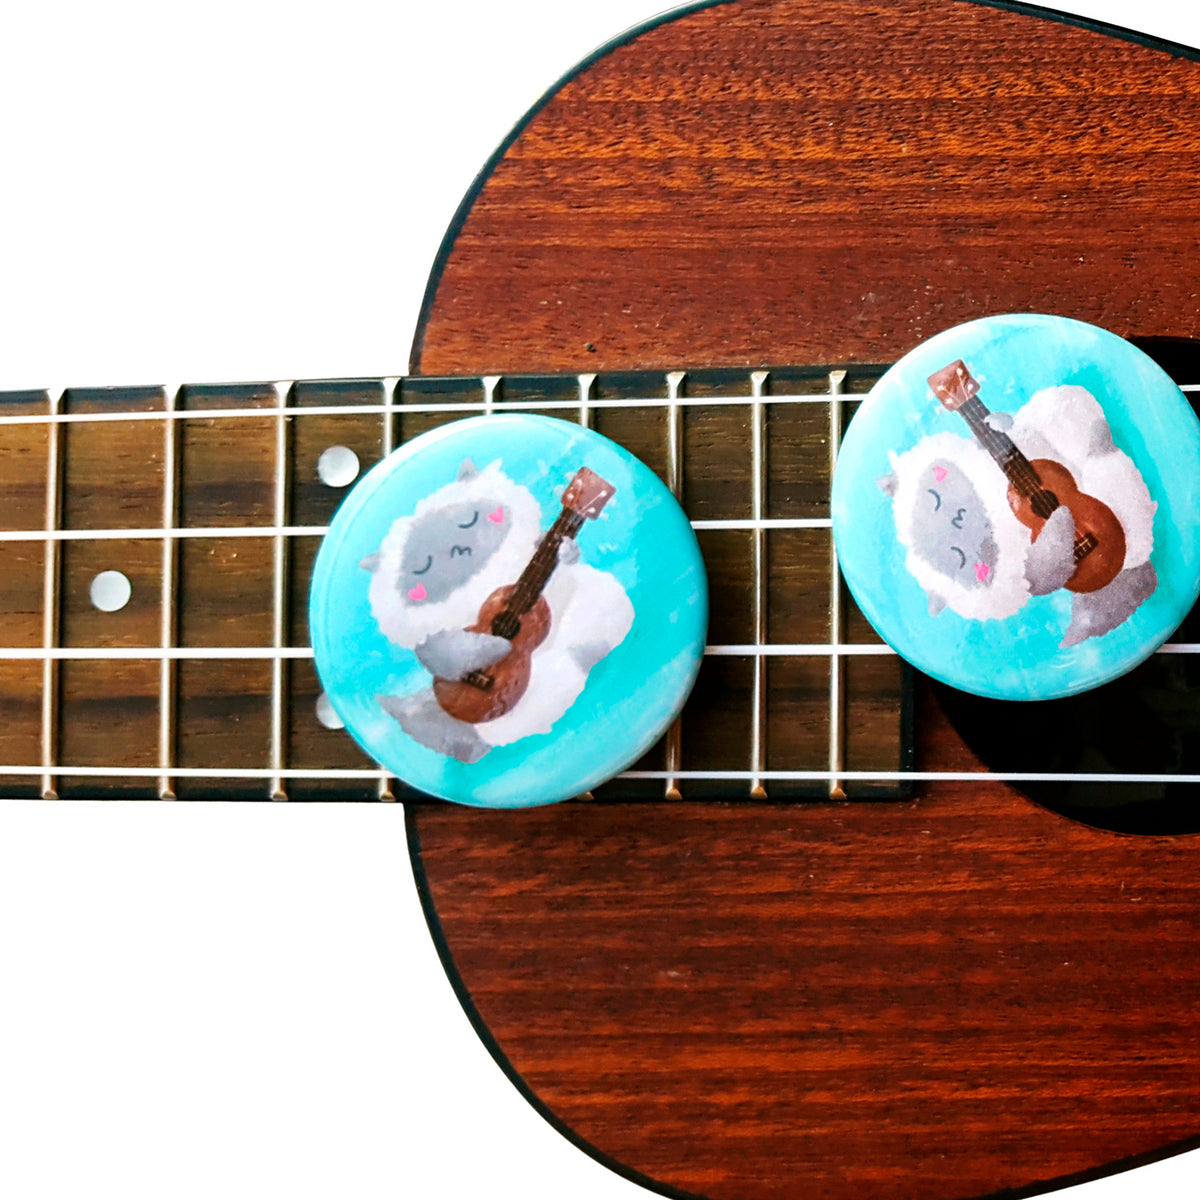 Ukulele Cat - Button or magnet with a digital painting of a cat playing the ukulele and singing by My Cat Is People.